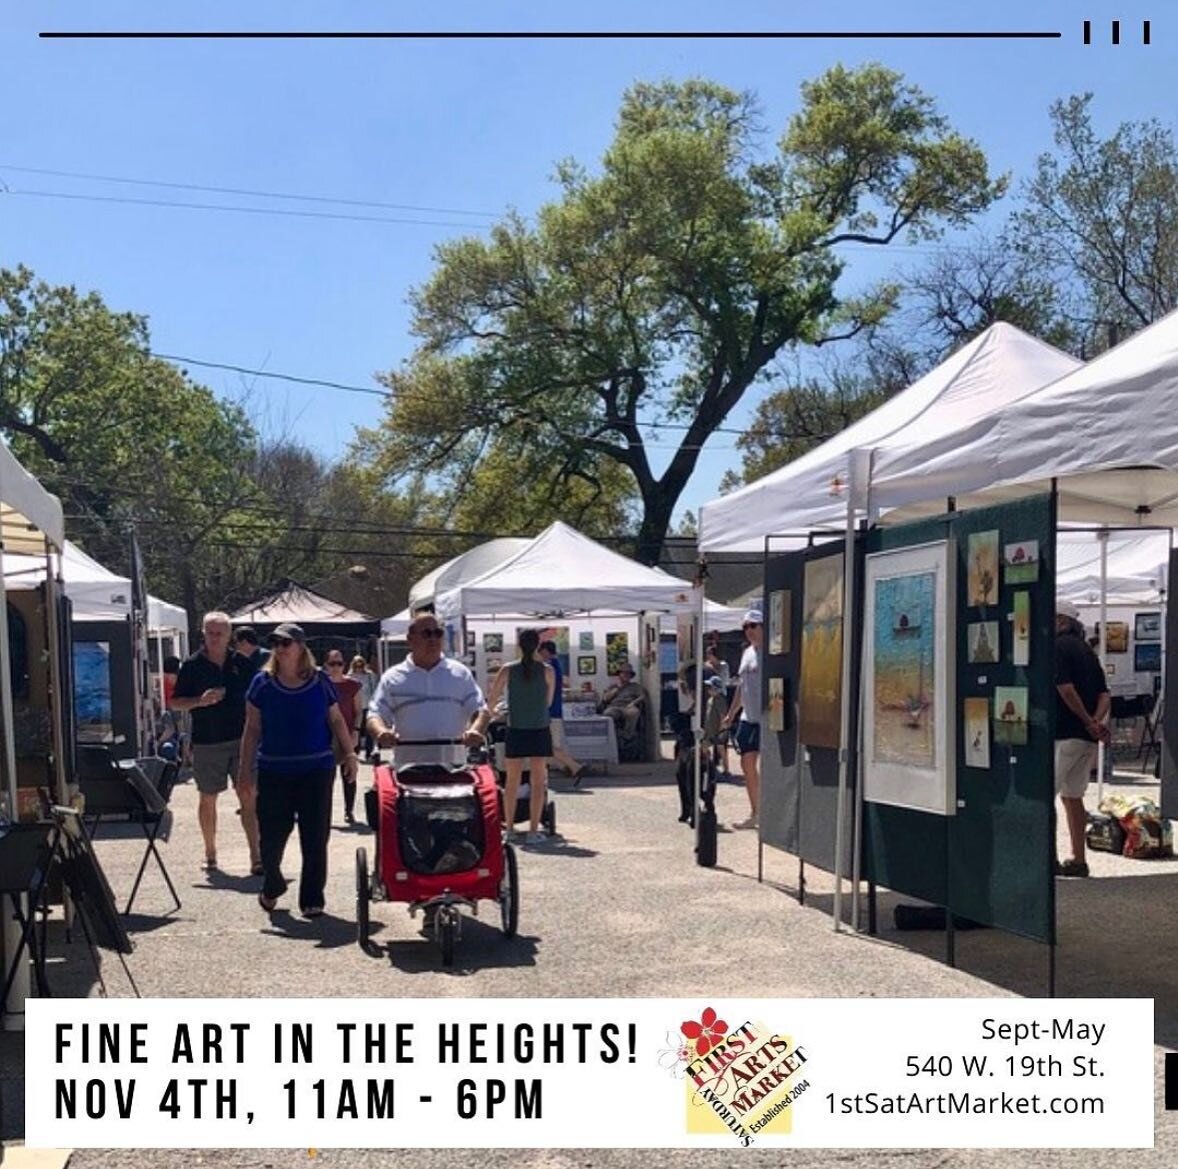 The First Saturday Arts Market is this weekend! It&rsquo;s looking like the weather will be perfect and I&rsquo;ll have a few new pieces with me, so mark your calendars! ☀️☀️

Saturday, Nov 4th from 11a-6p
540 W. 19th St. Houston TX. 77008
1stSatArtM